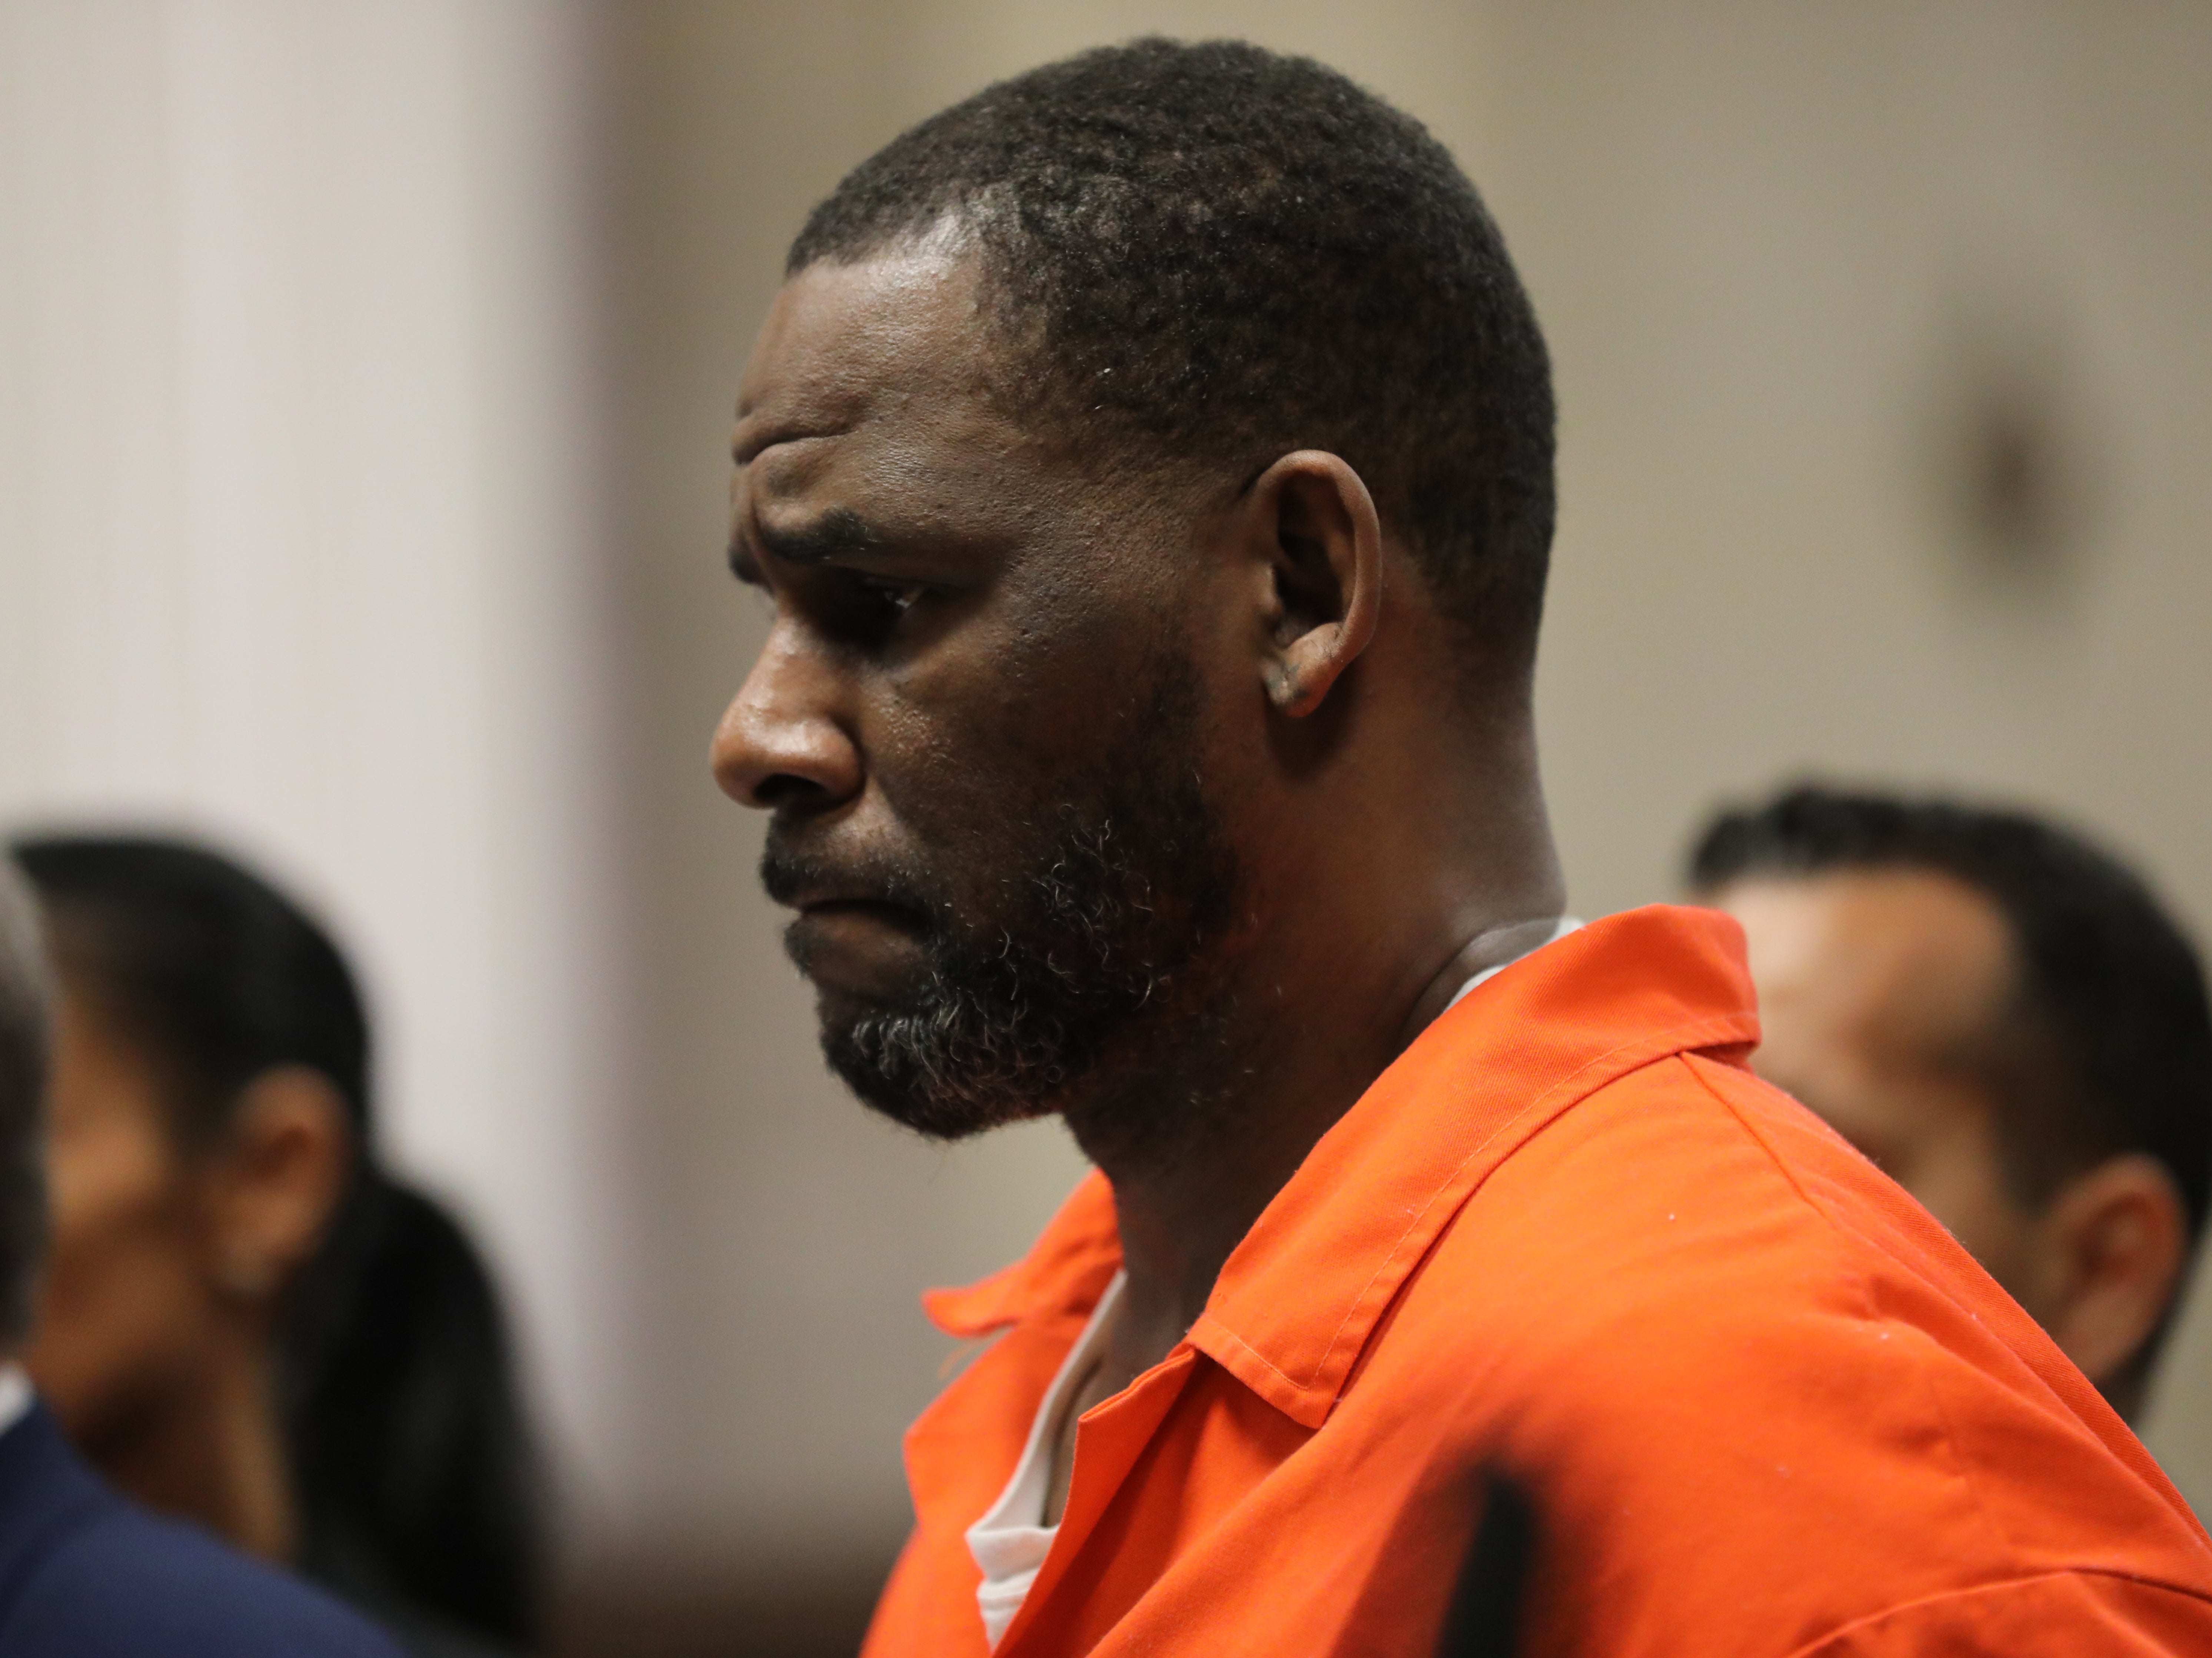 R Kelly appears in court in Chicago, Illinois